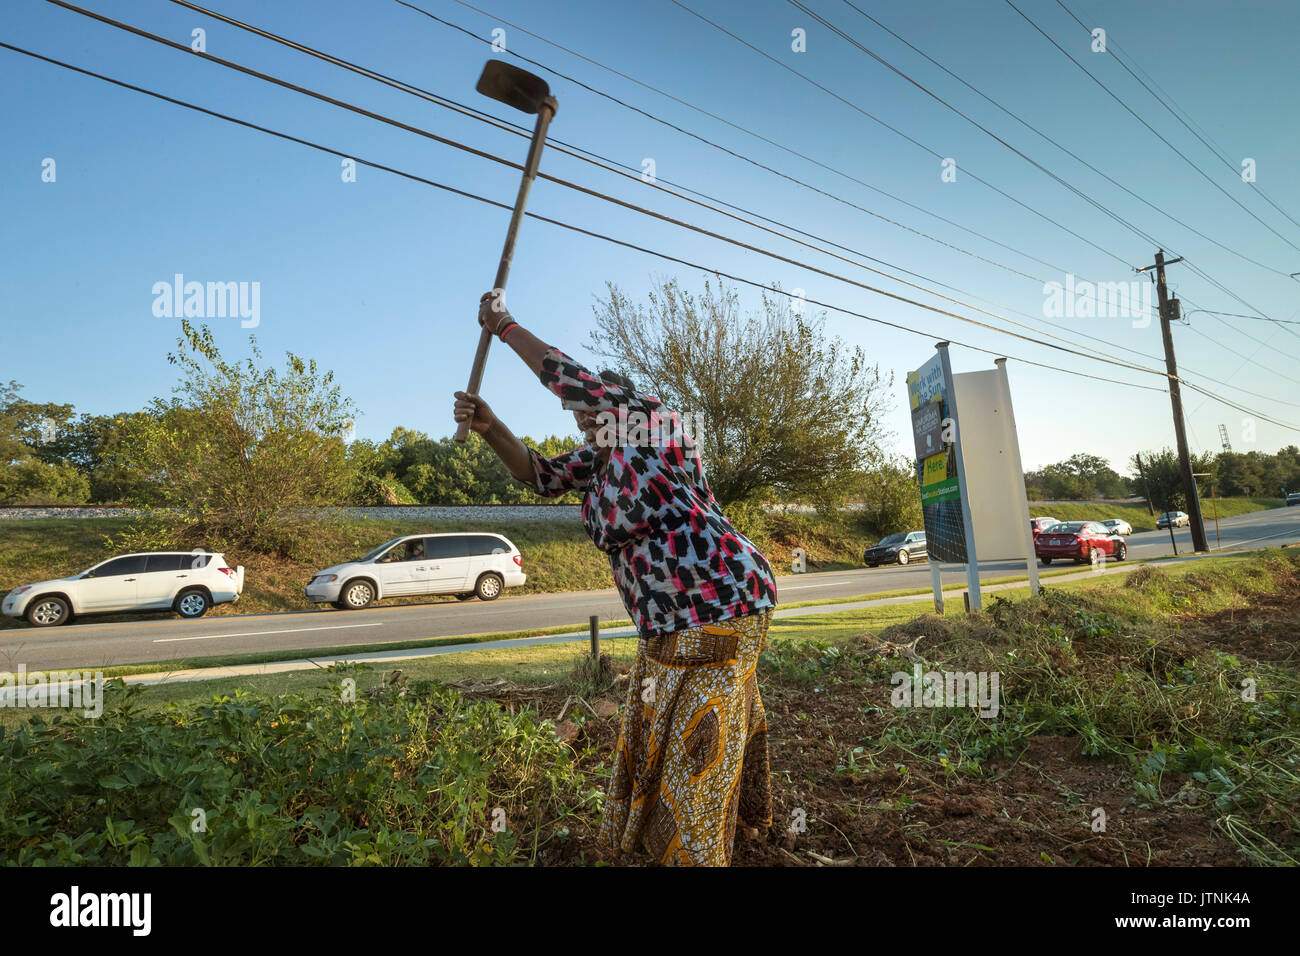 Haltet Hatungimana, swinging hoe, harvests peanuts on a plot of land in Decatur, GA. She is a refugee from Burundi and sells her produce through Global Growers. Stock Photo